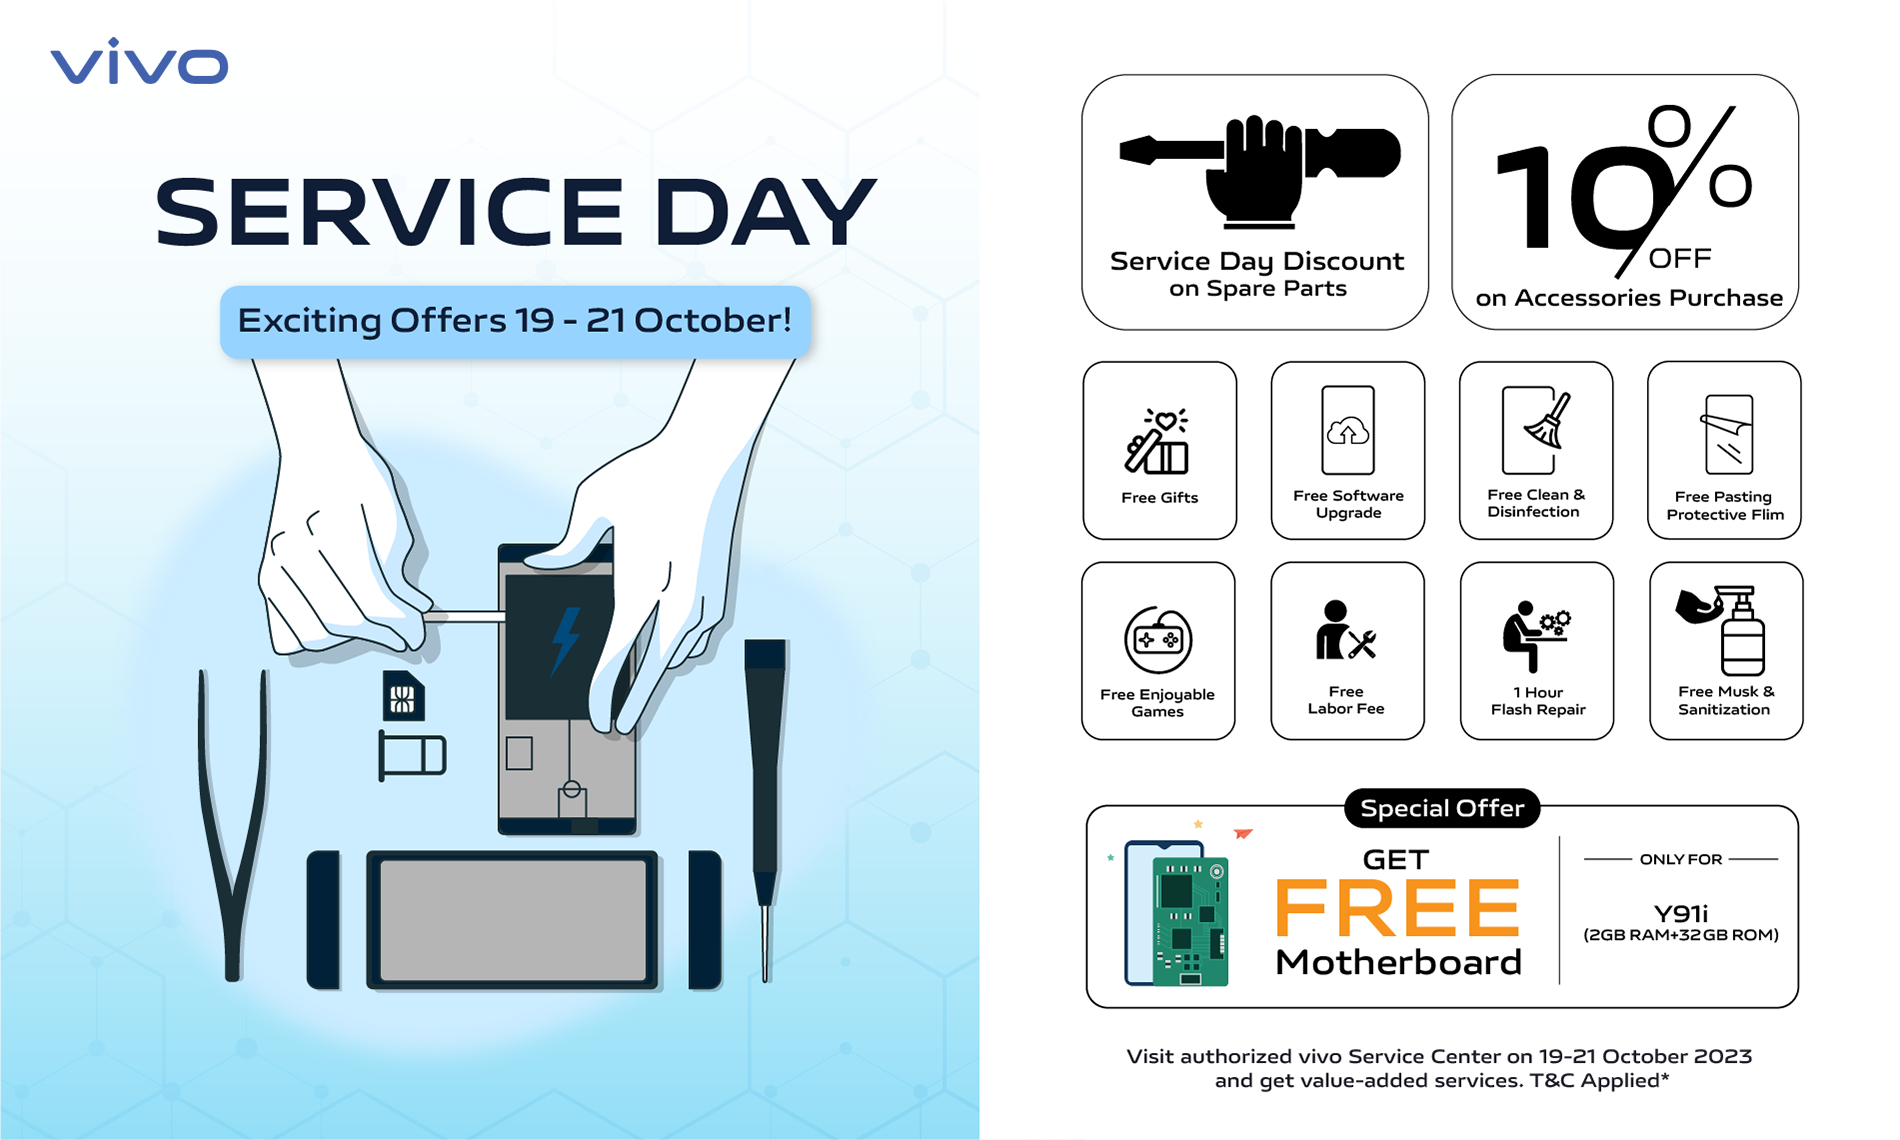 Exciting vivo SERVICE DAY with Special Offers!